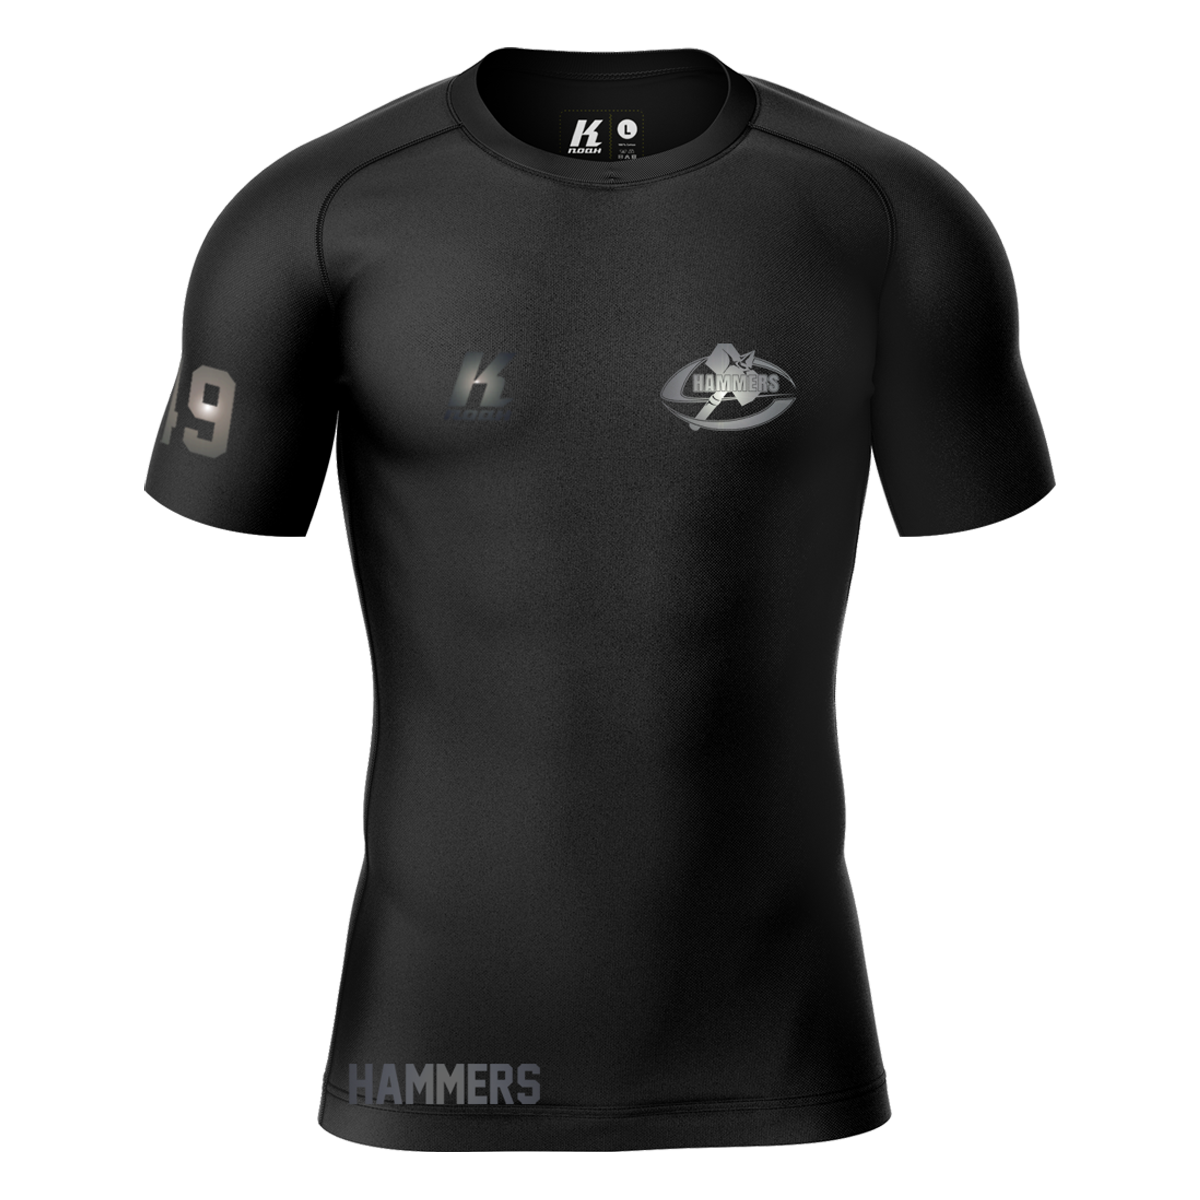 S-Hammers "Blackline" K.Tech Compression Shortsleeve Shirt with Playernumber/Initials